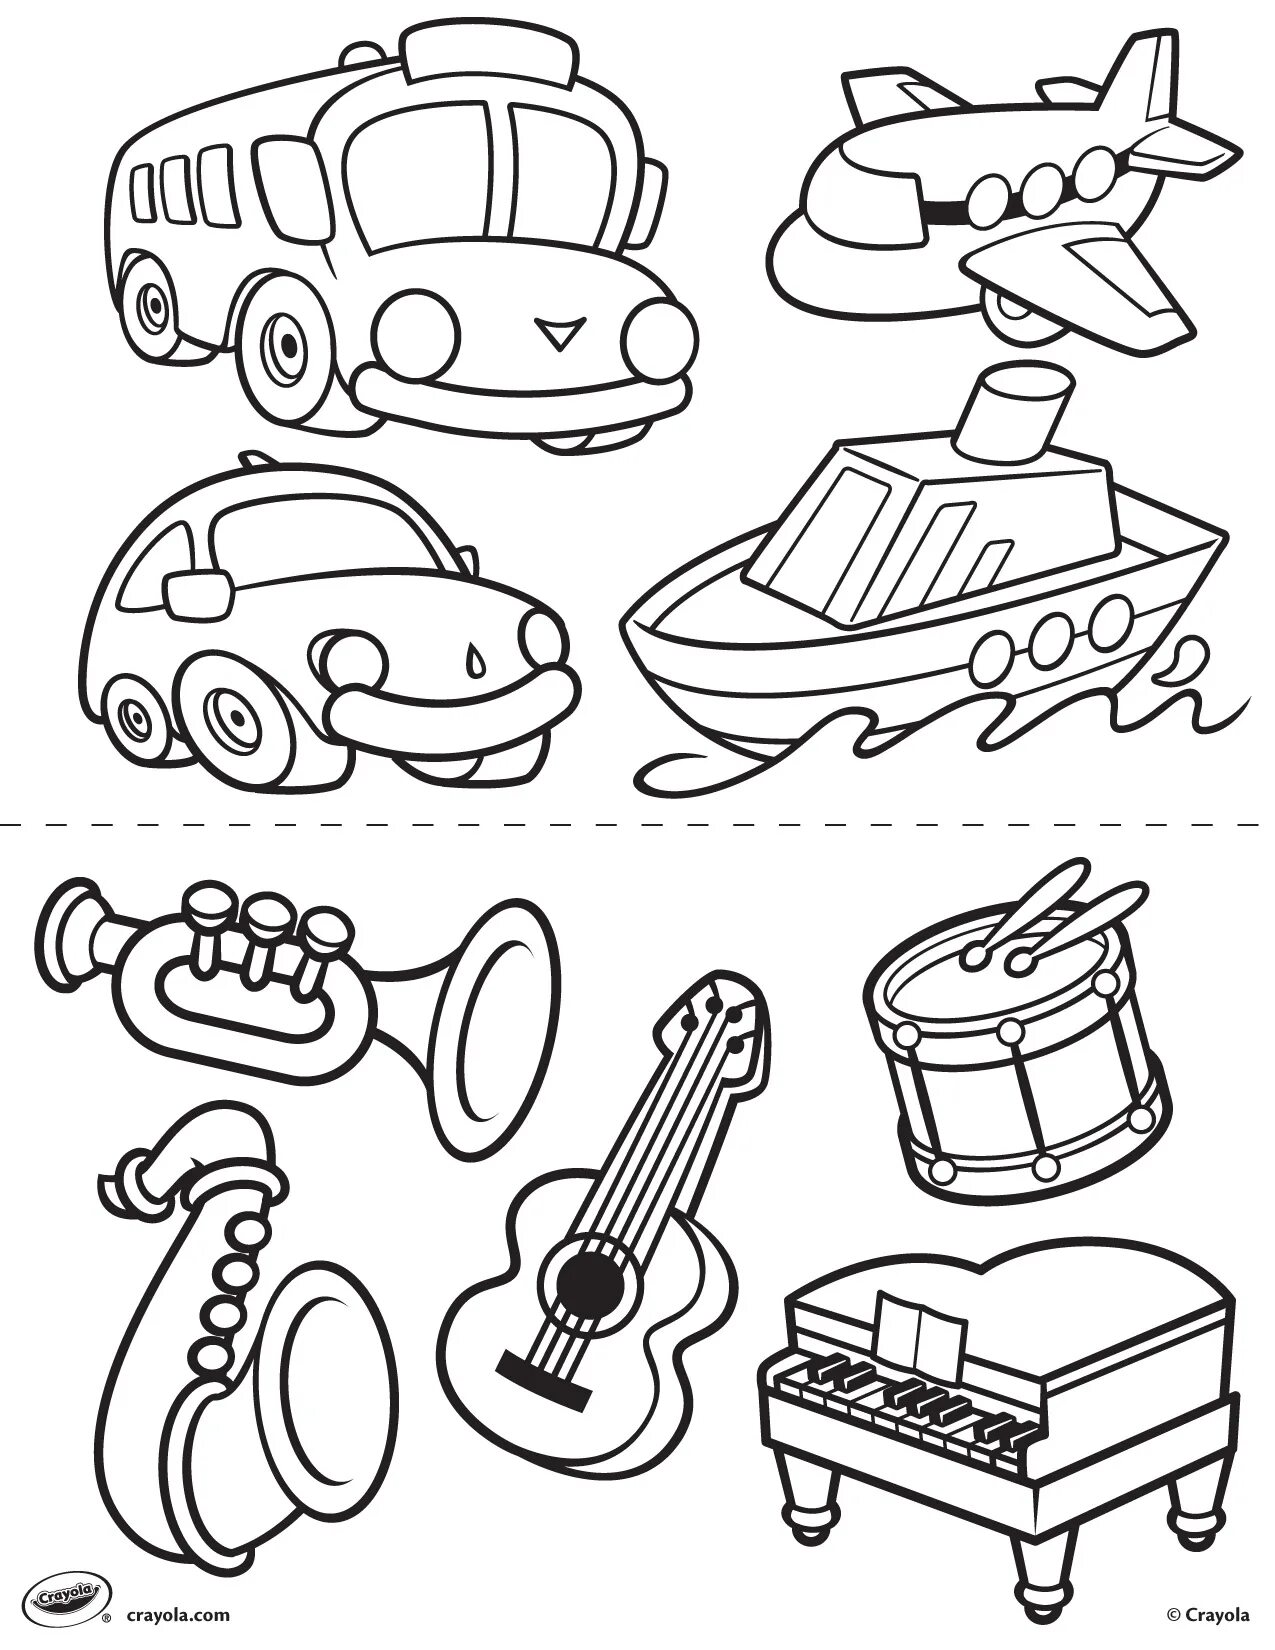 Fun segway coloring book for 6-7 year olds